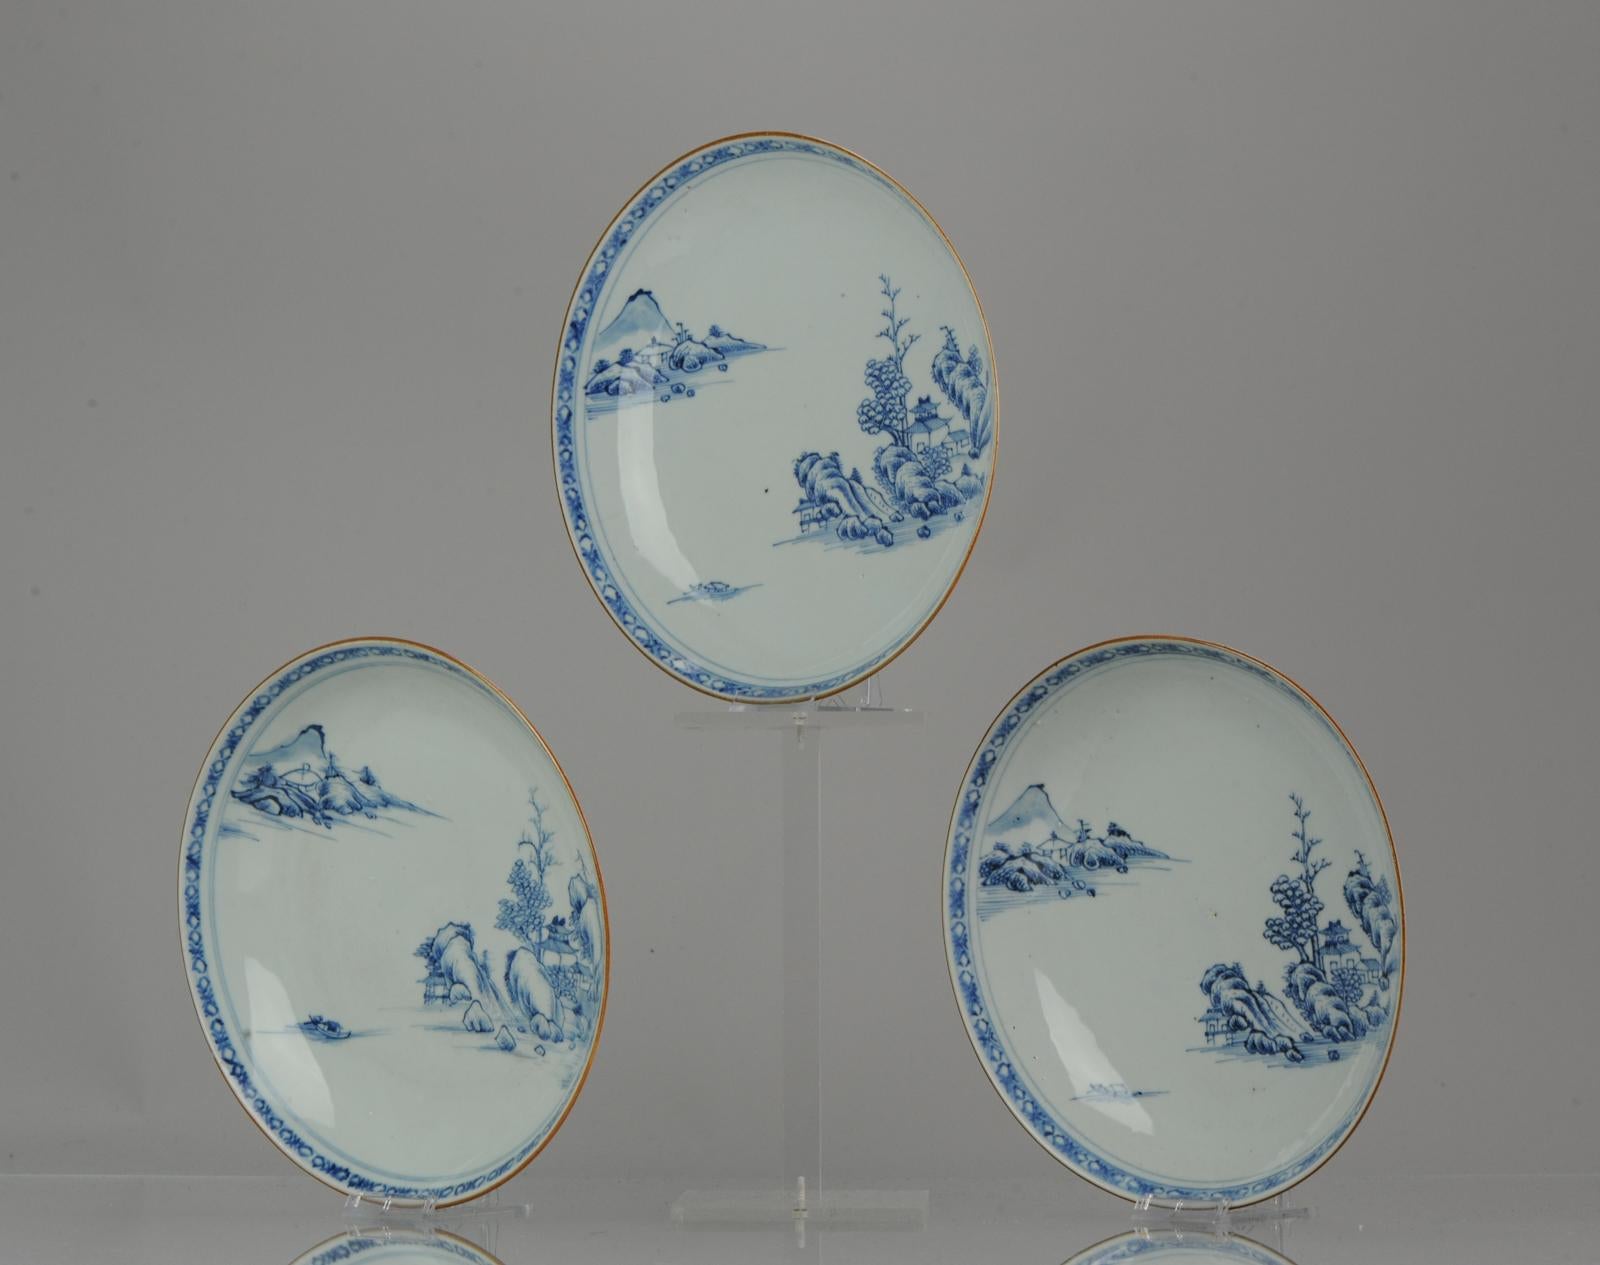 A very nicely decorated set of landscape plates. Stylistic painting style. Deep plates.

Condition
Overall condition dish 1 with a glaze line underside rim and small frit. Dish 2 3 lines, dish 3 1 line. Size 229 x 38mm DXH Approx. to be updated